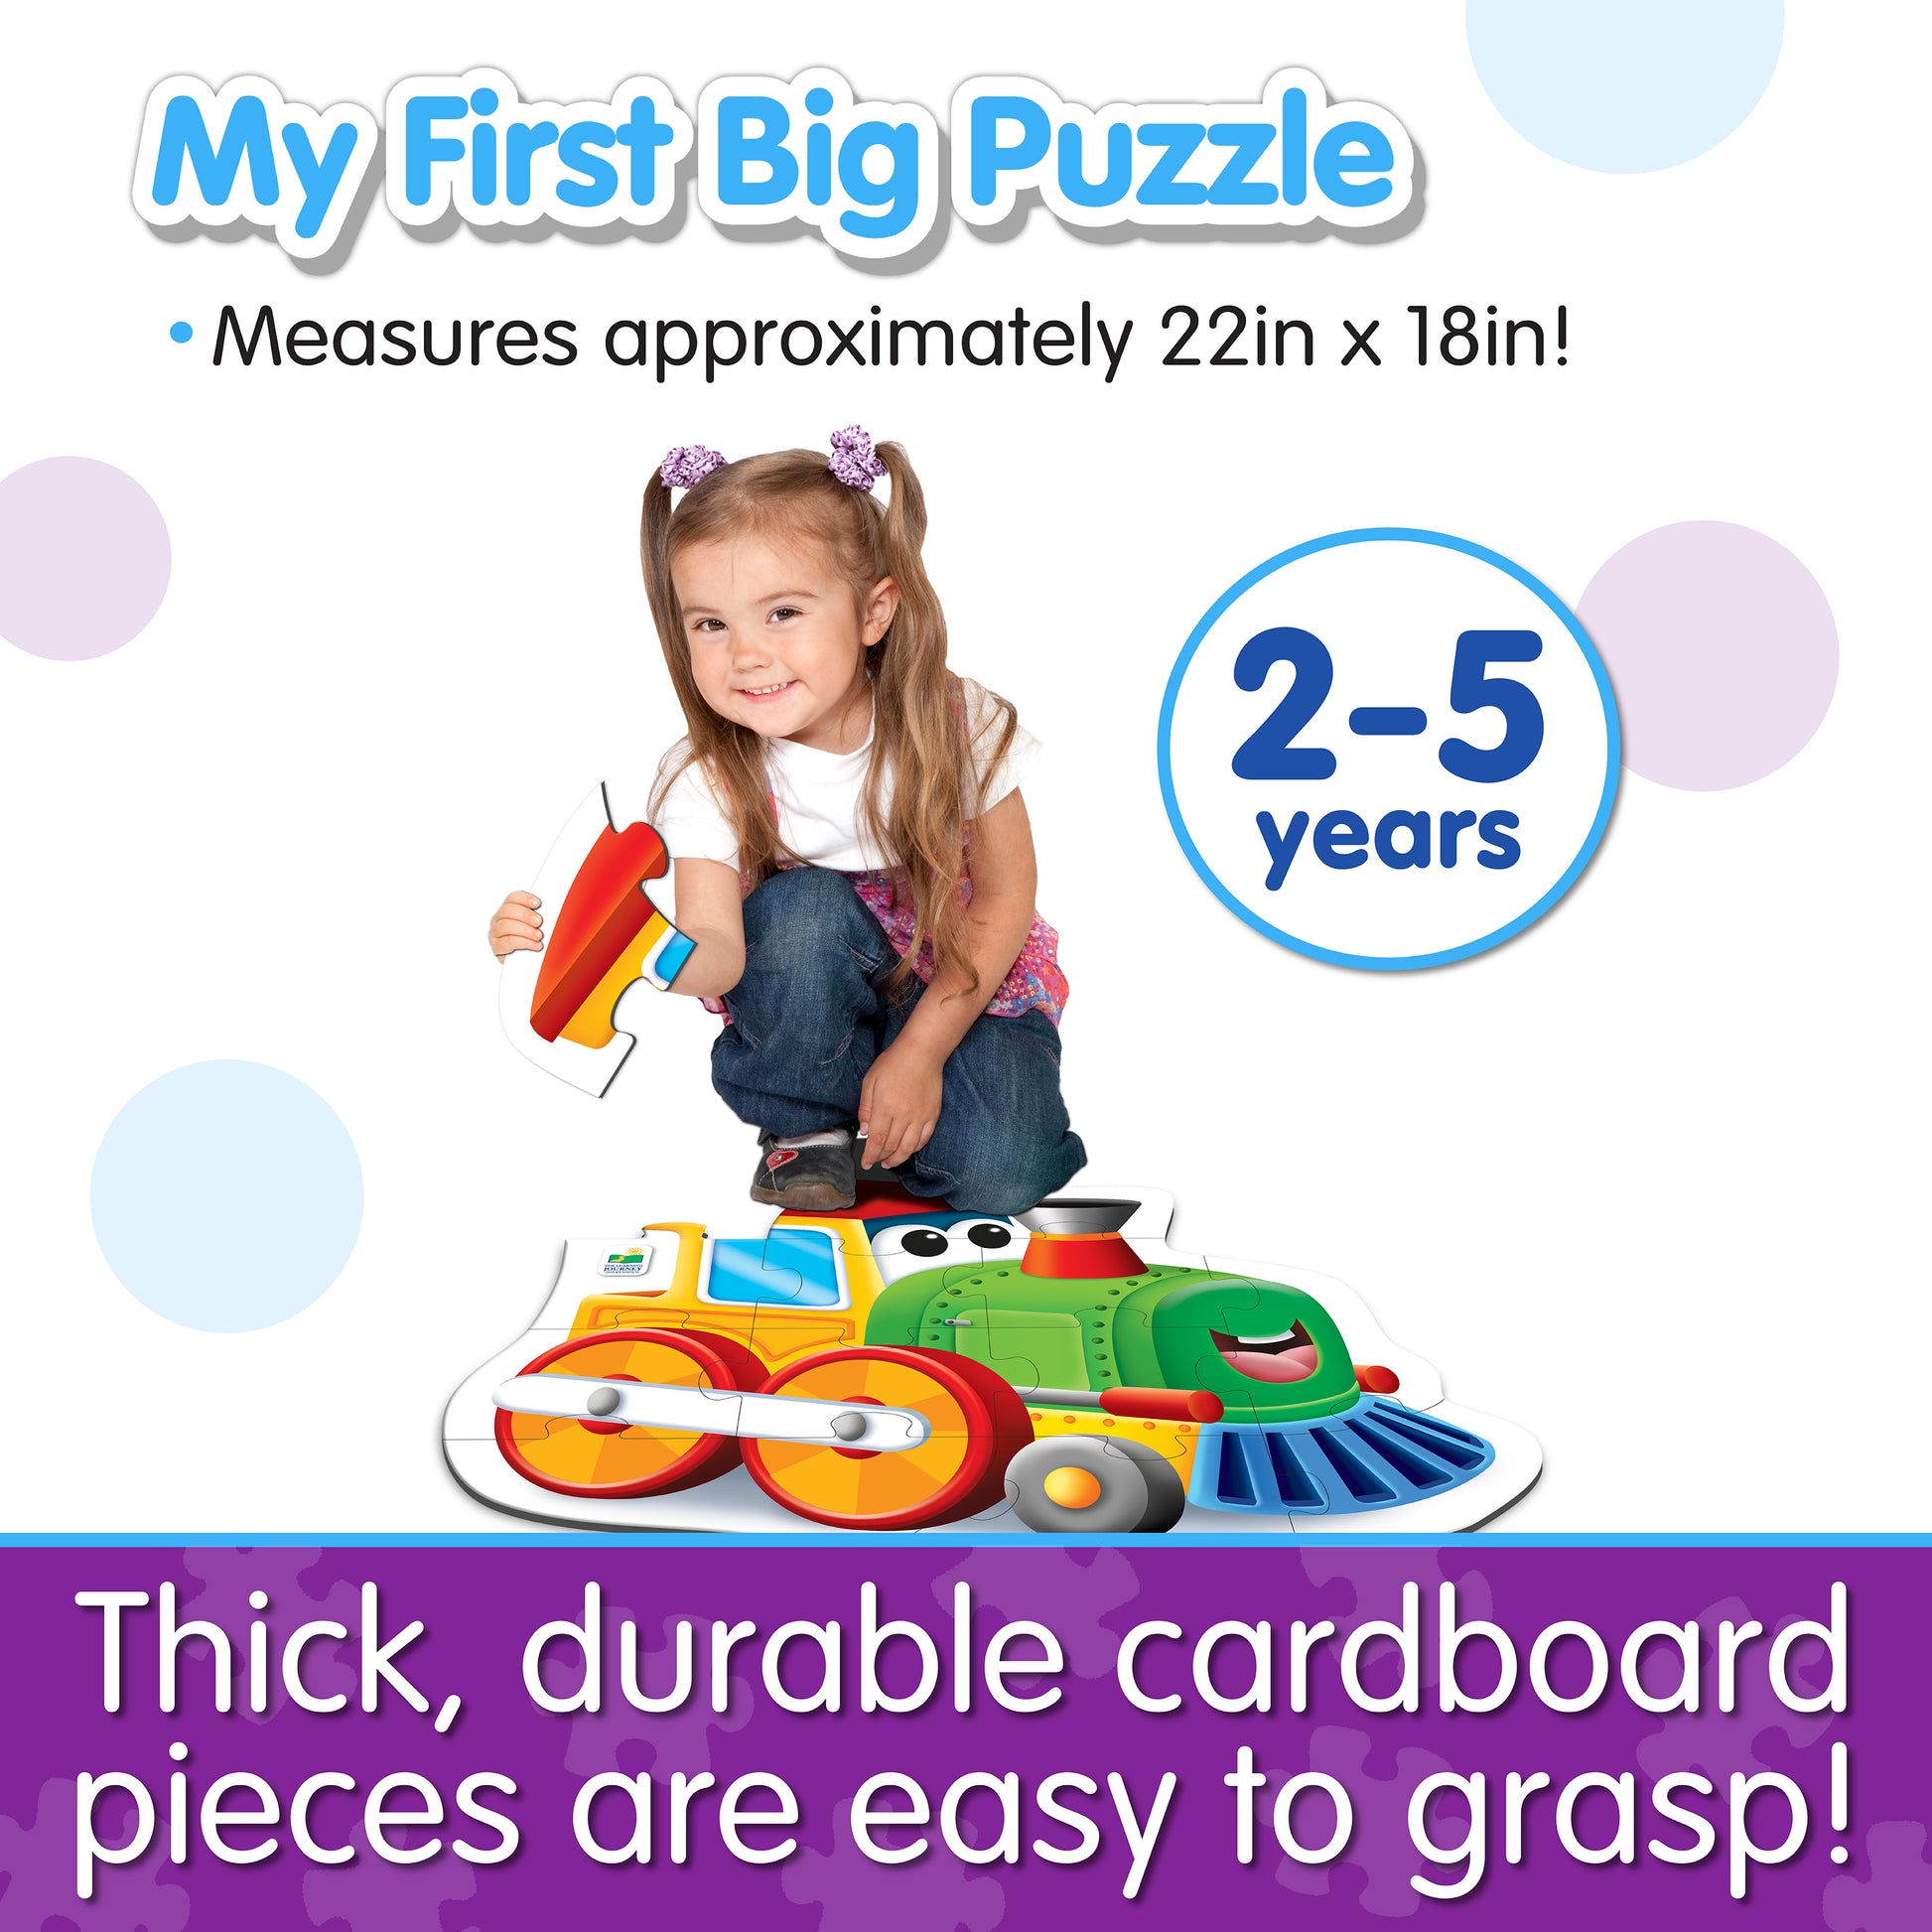 Infographic about My First Big Puzzle - Train's features that says, "Thick, durable cardboard pieces are easy to grasp!"